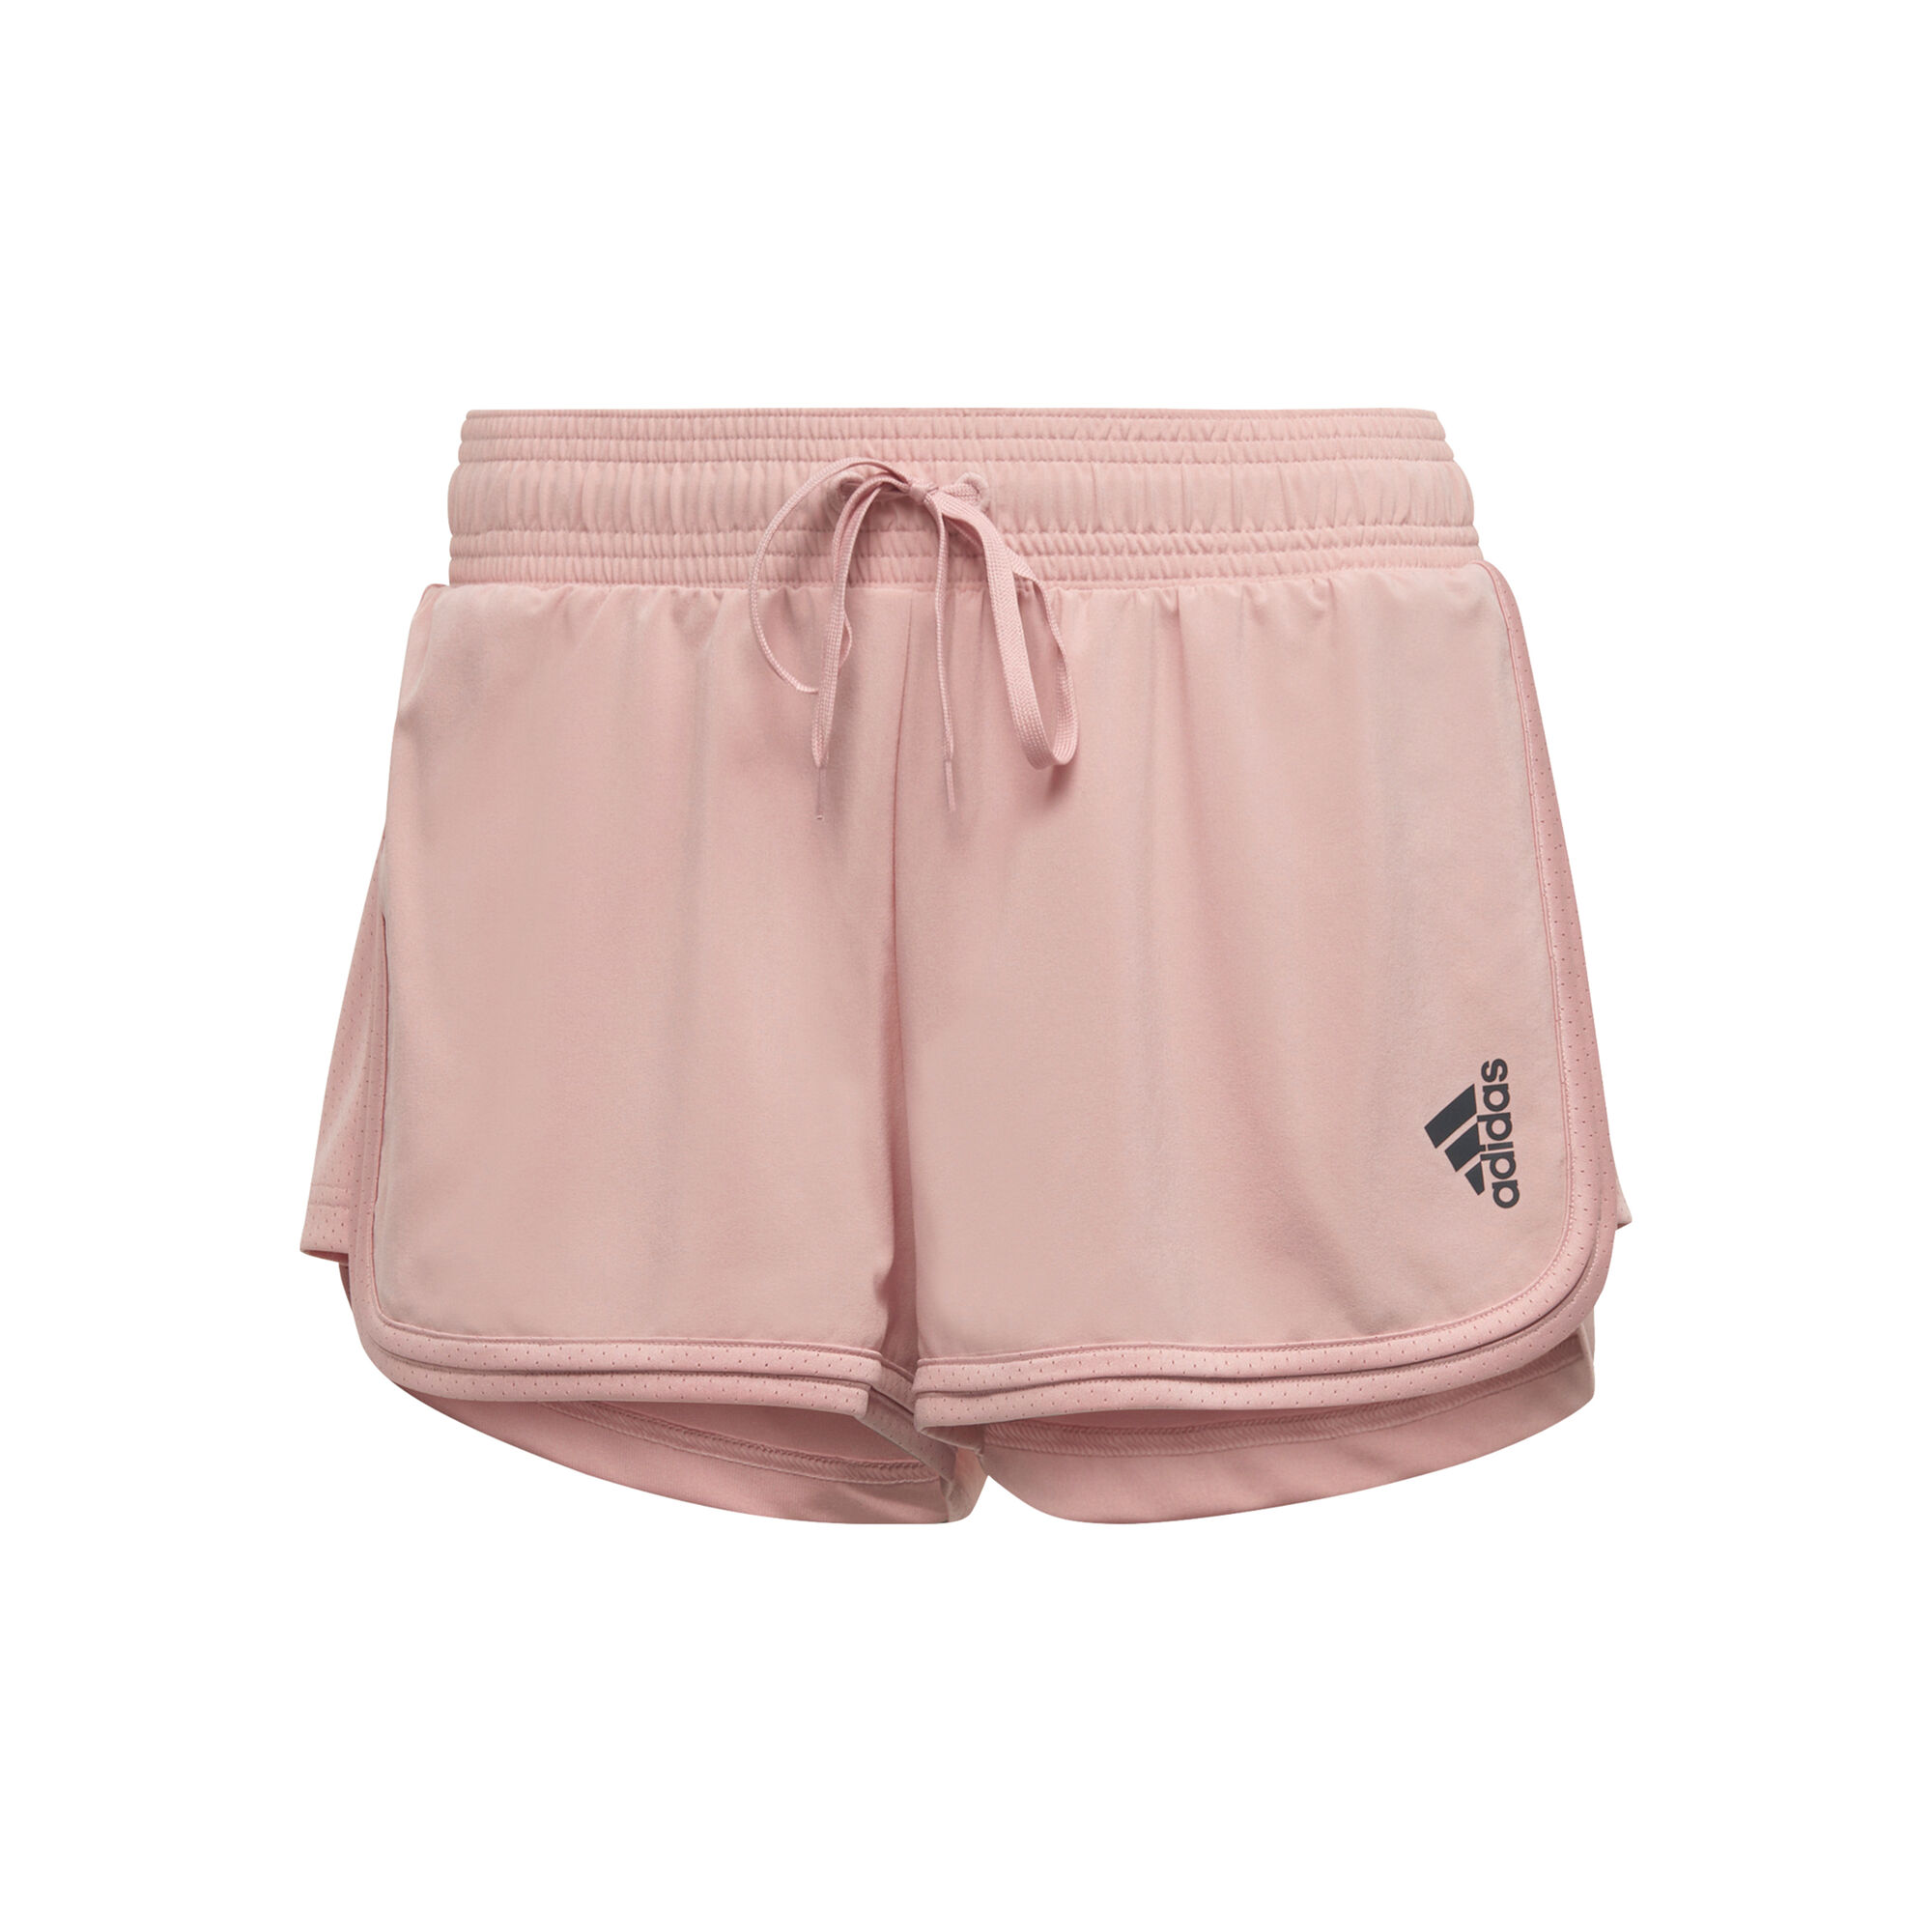 Club Mujeres - Rosa compra online Tennis-Point